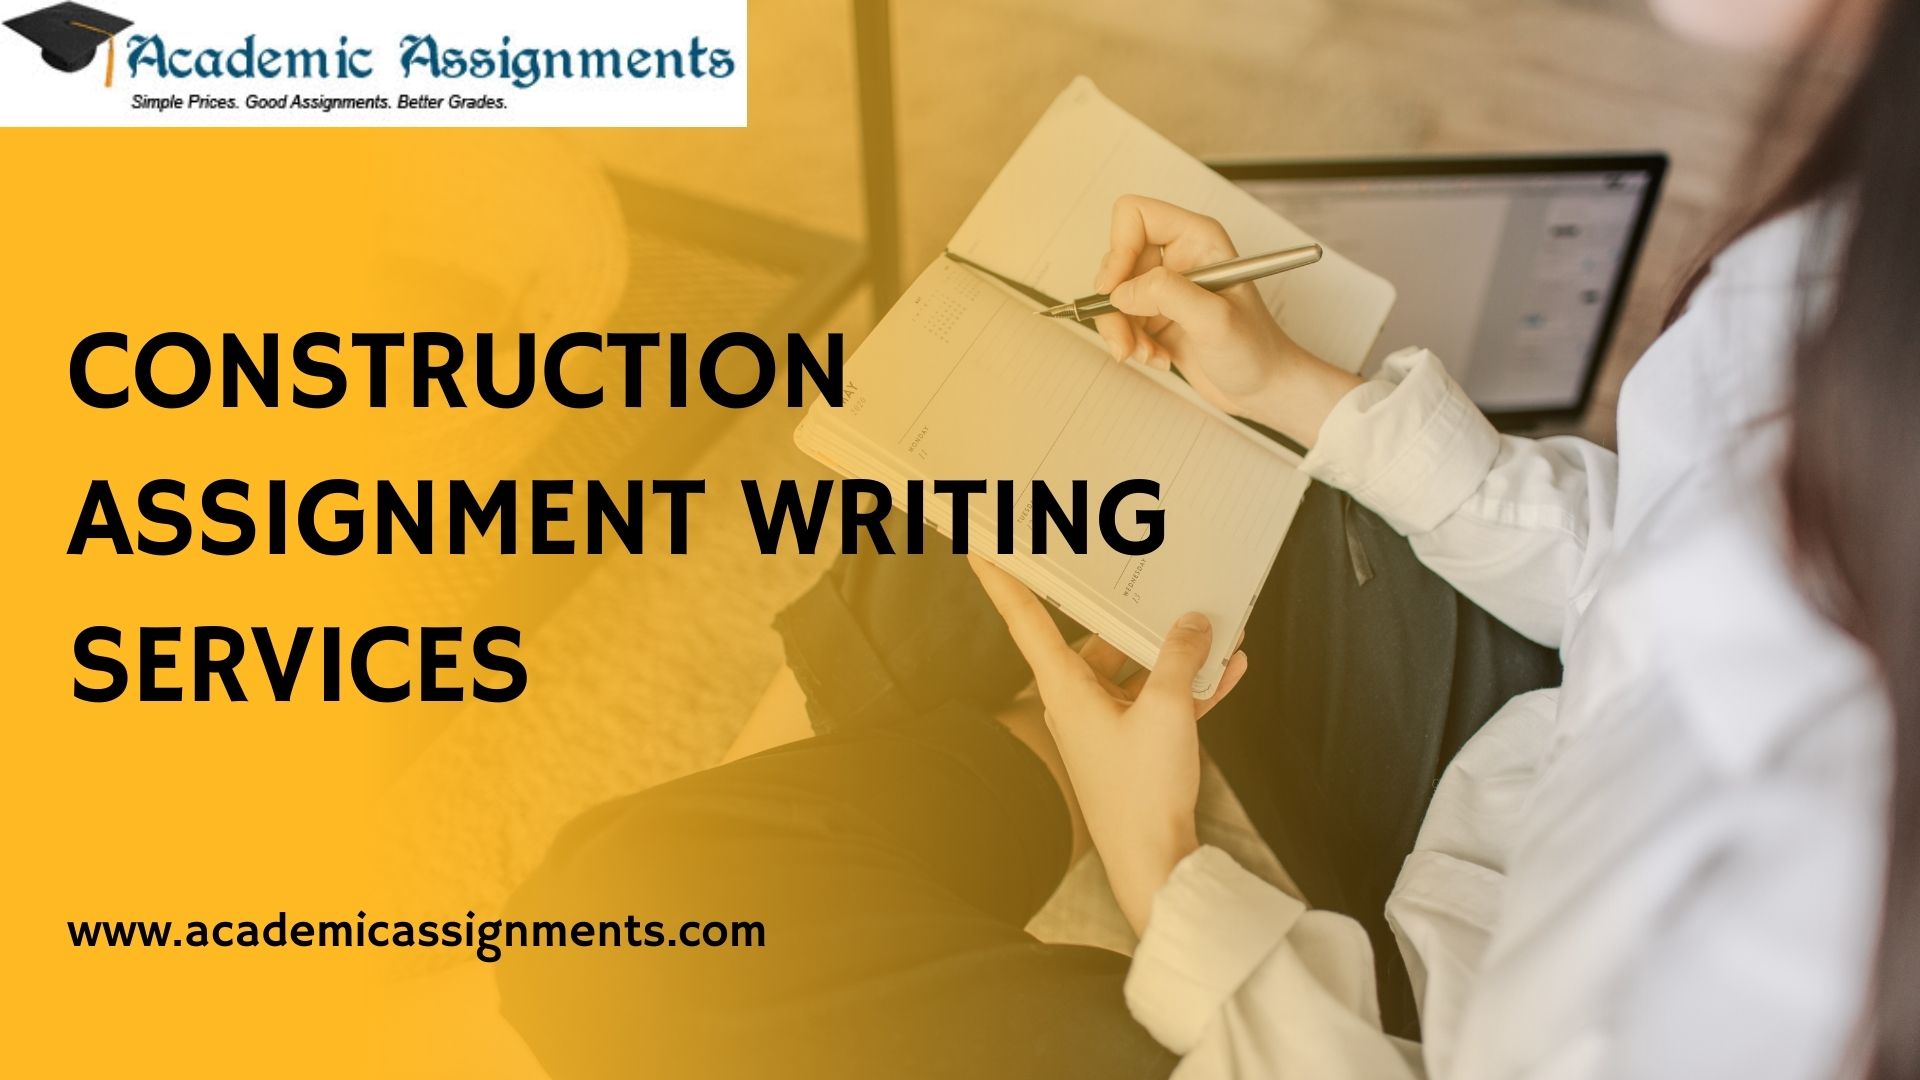 CONSTRUCTION ASSIGNMENT WRITING SERVICES